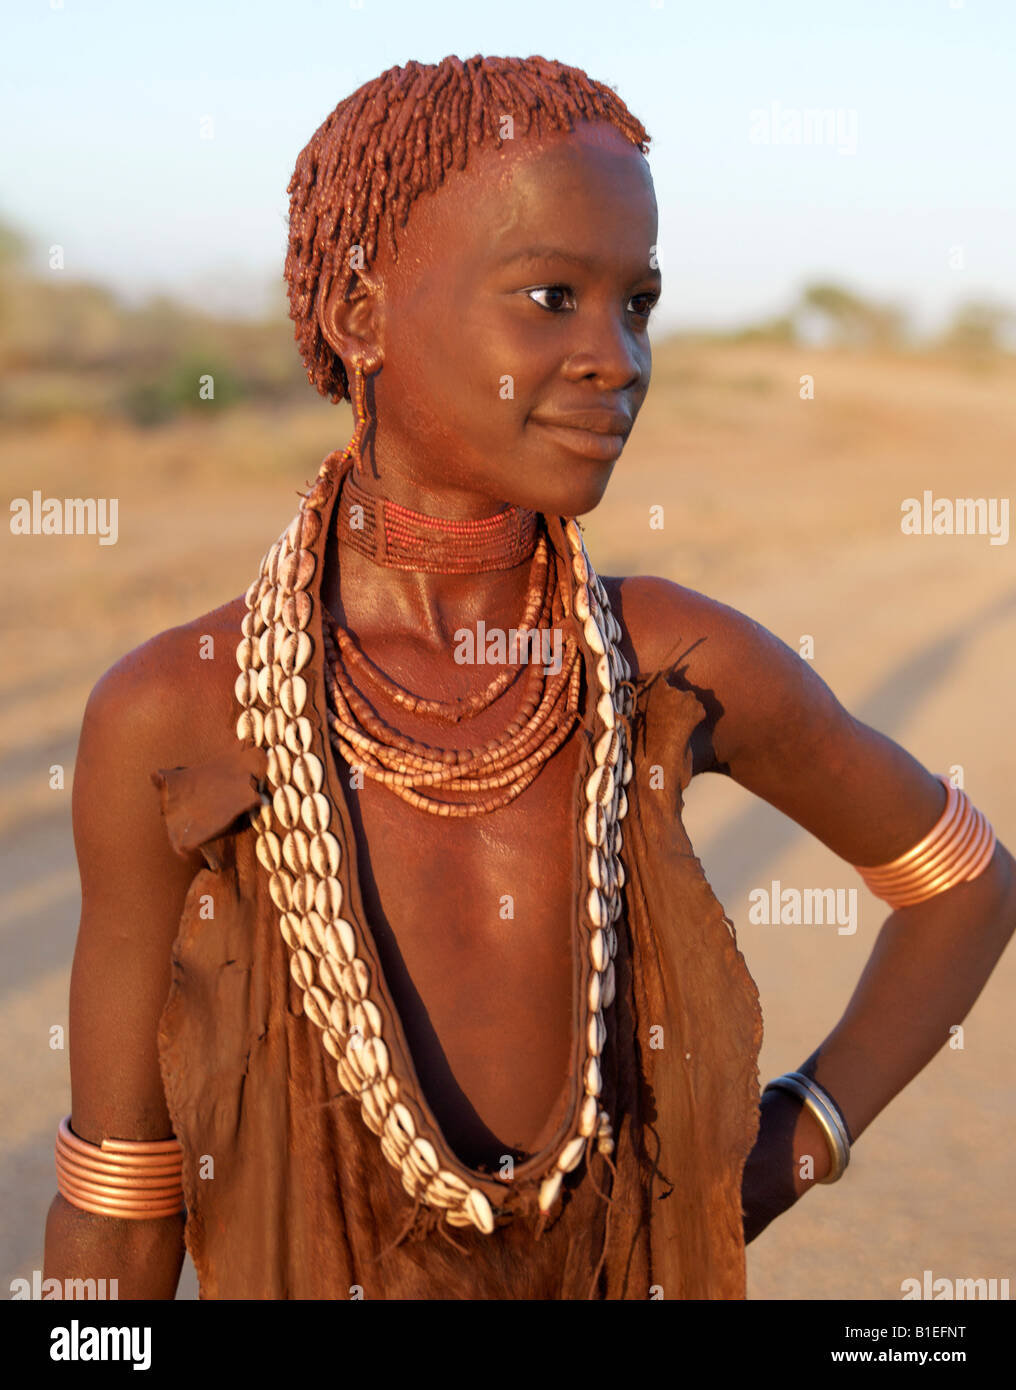 The ochre worn by a pretty young Hamar girl glows deep red in the late afternoon light.The Hamar are semi-nomadic pastoralists. Stock Photo